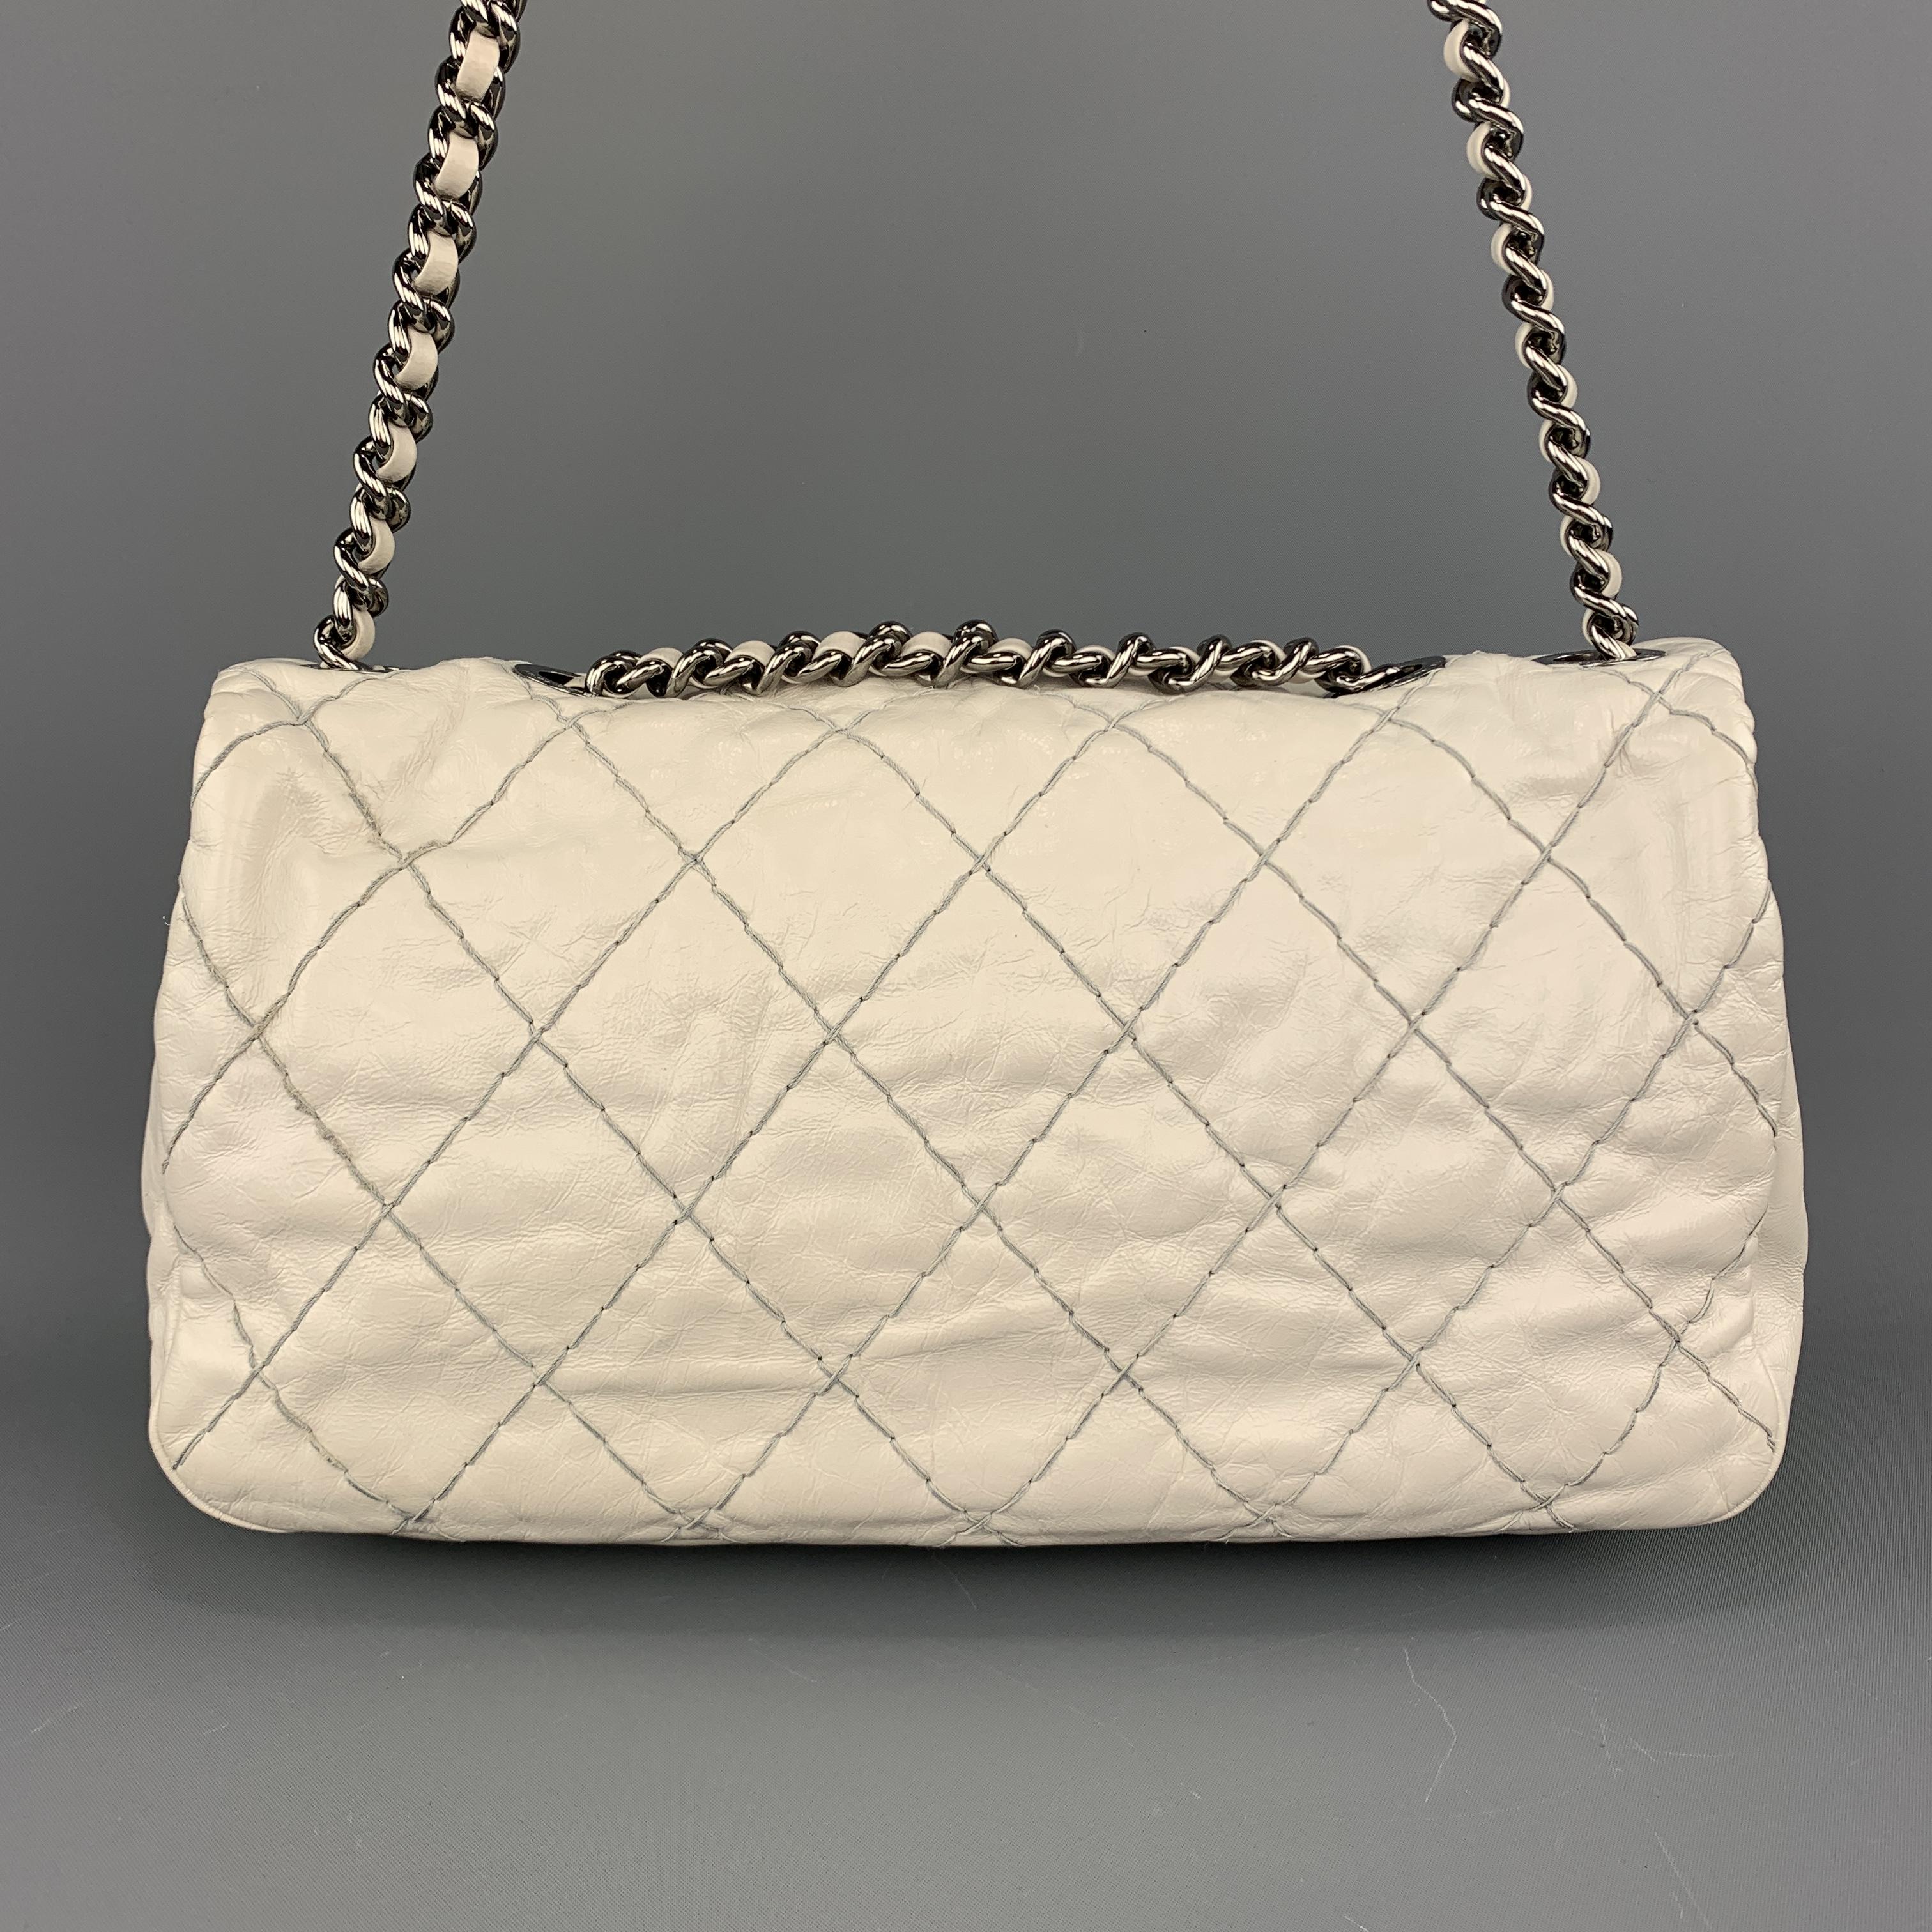 CHANEL Topstitch Quilted Cream Leather Flap CC Chain Strap Handbag In Excellent Condition In San Francisco, CA